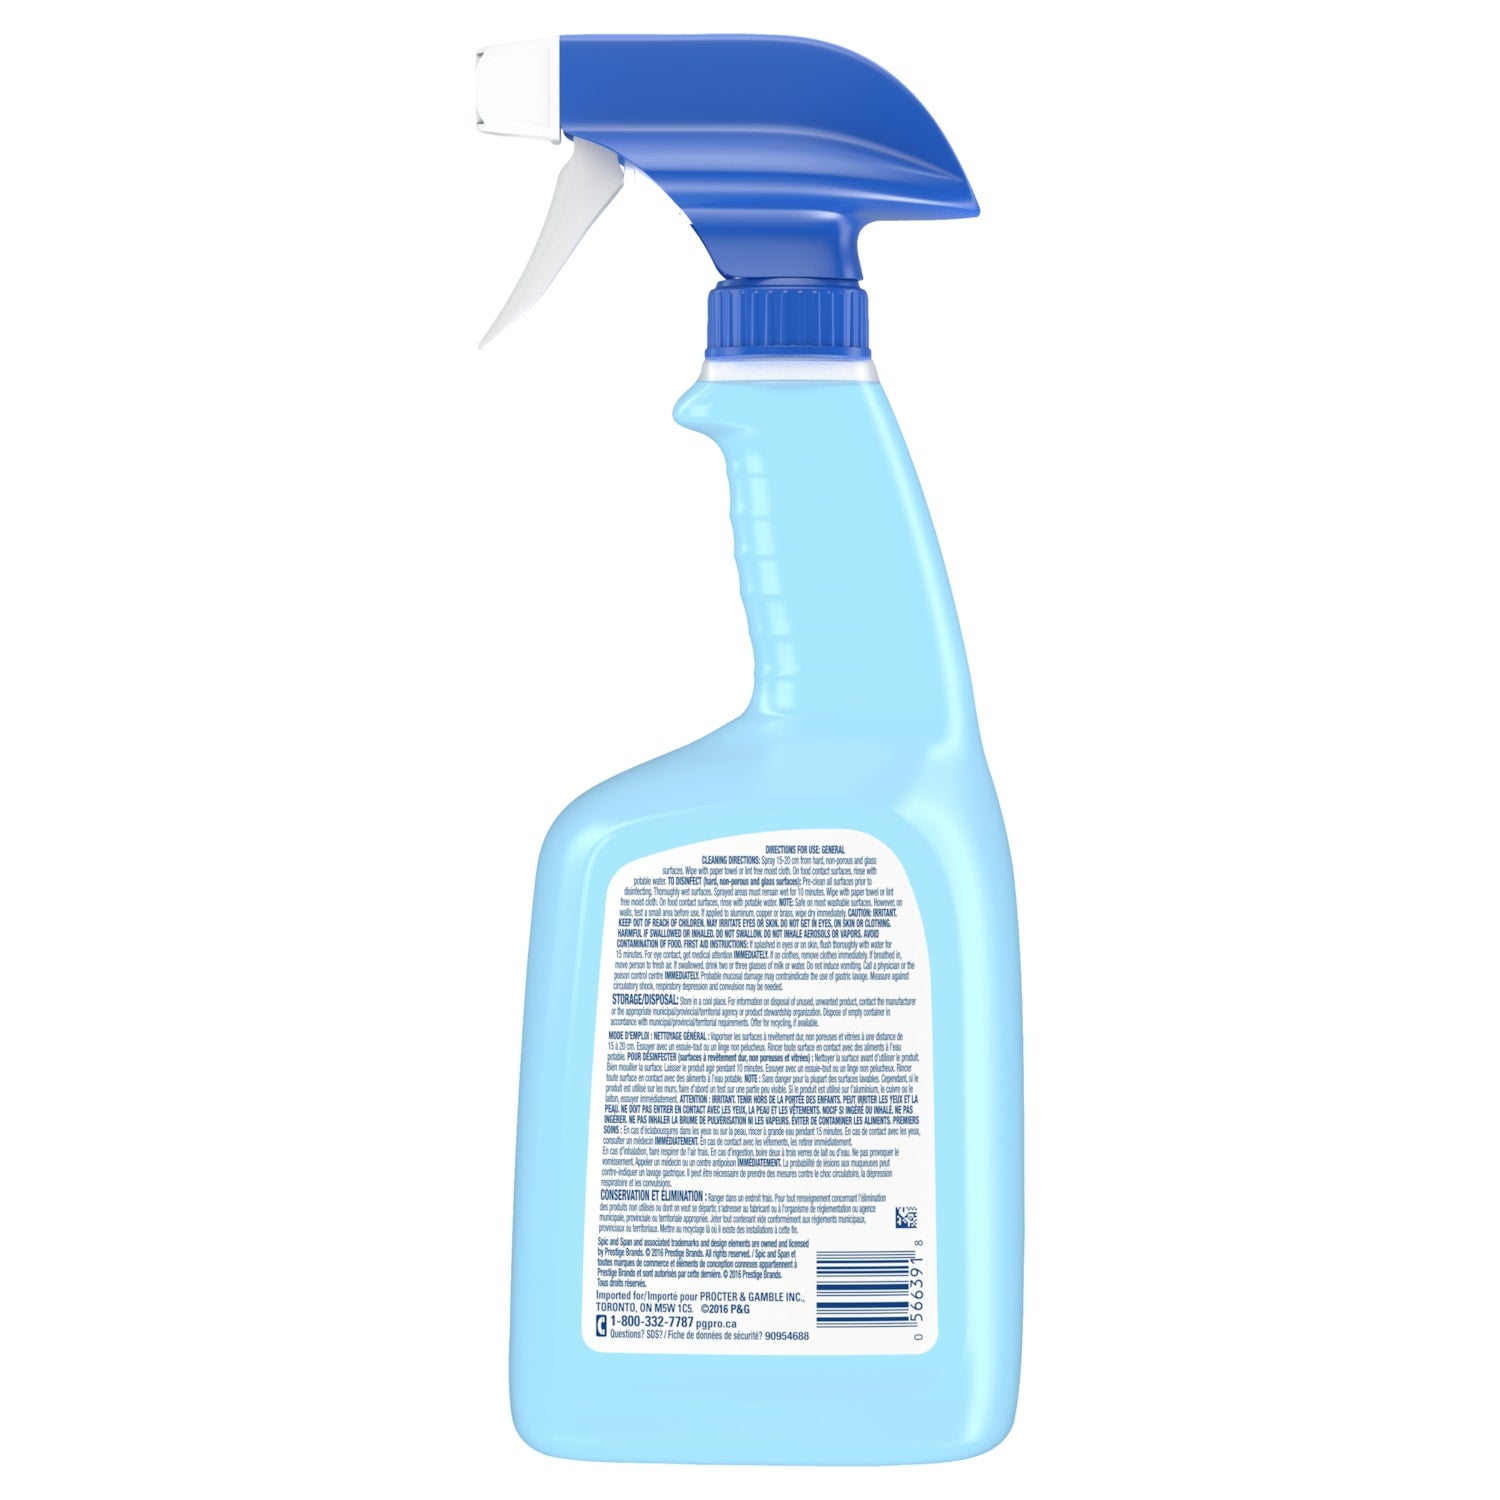 Spic & Span 3-In-1 All Purpose Disinfectant Ready To Use Cleaner - 945 ml - Case of 8